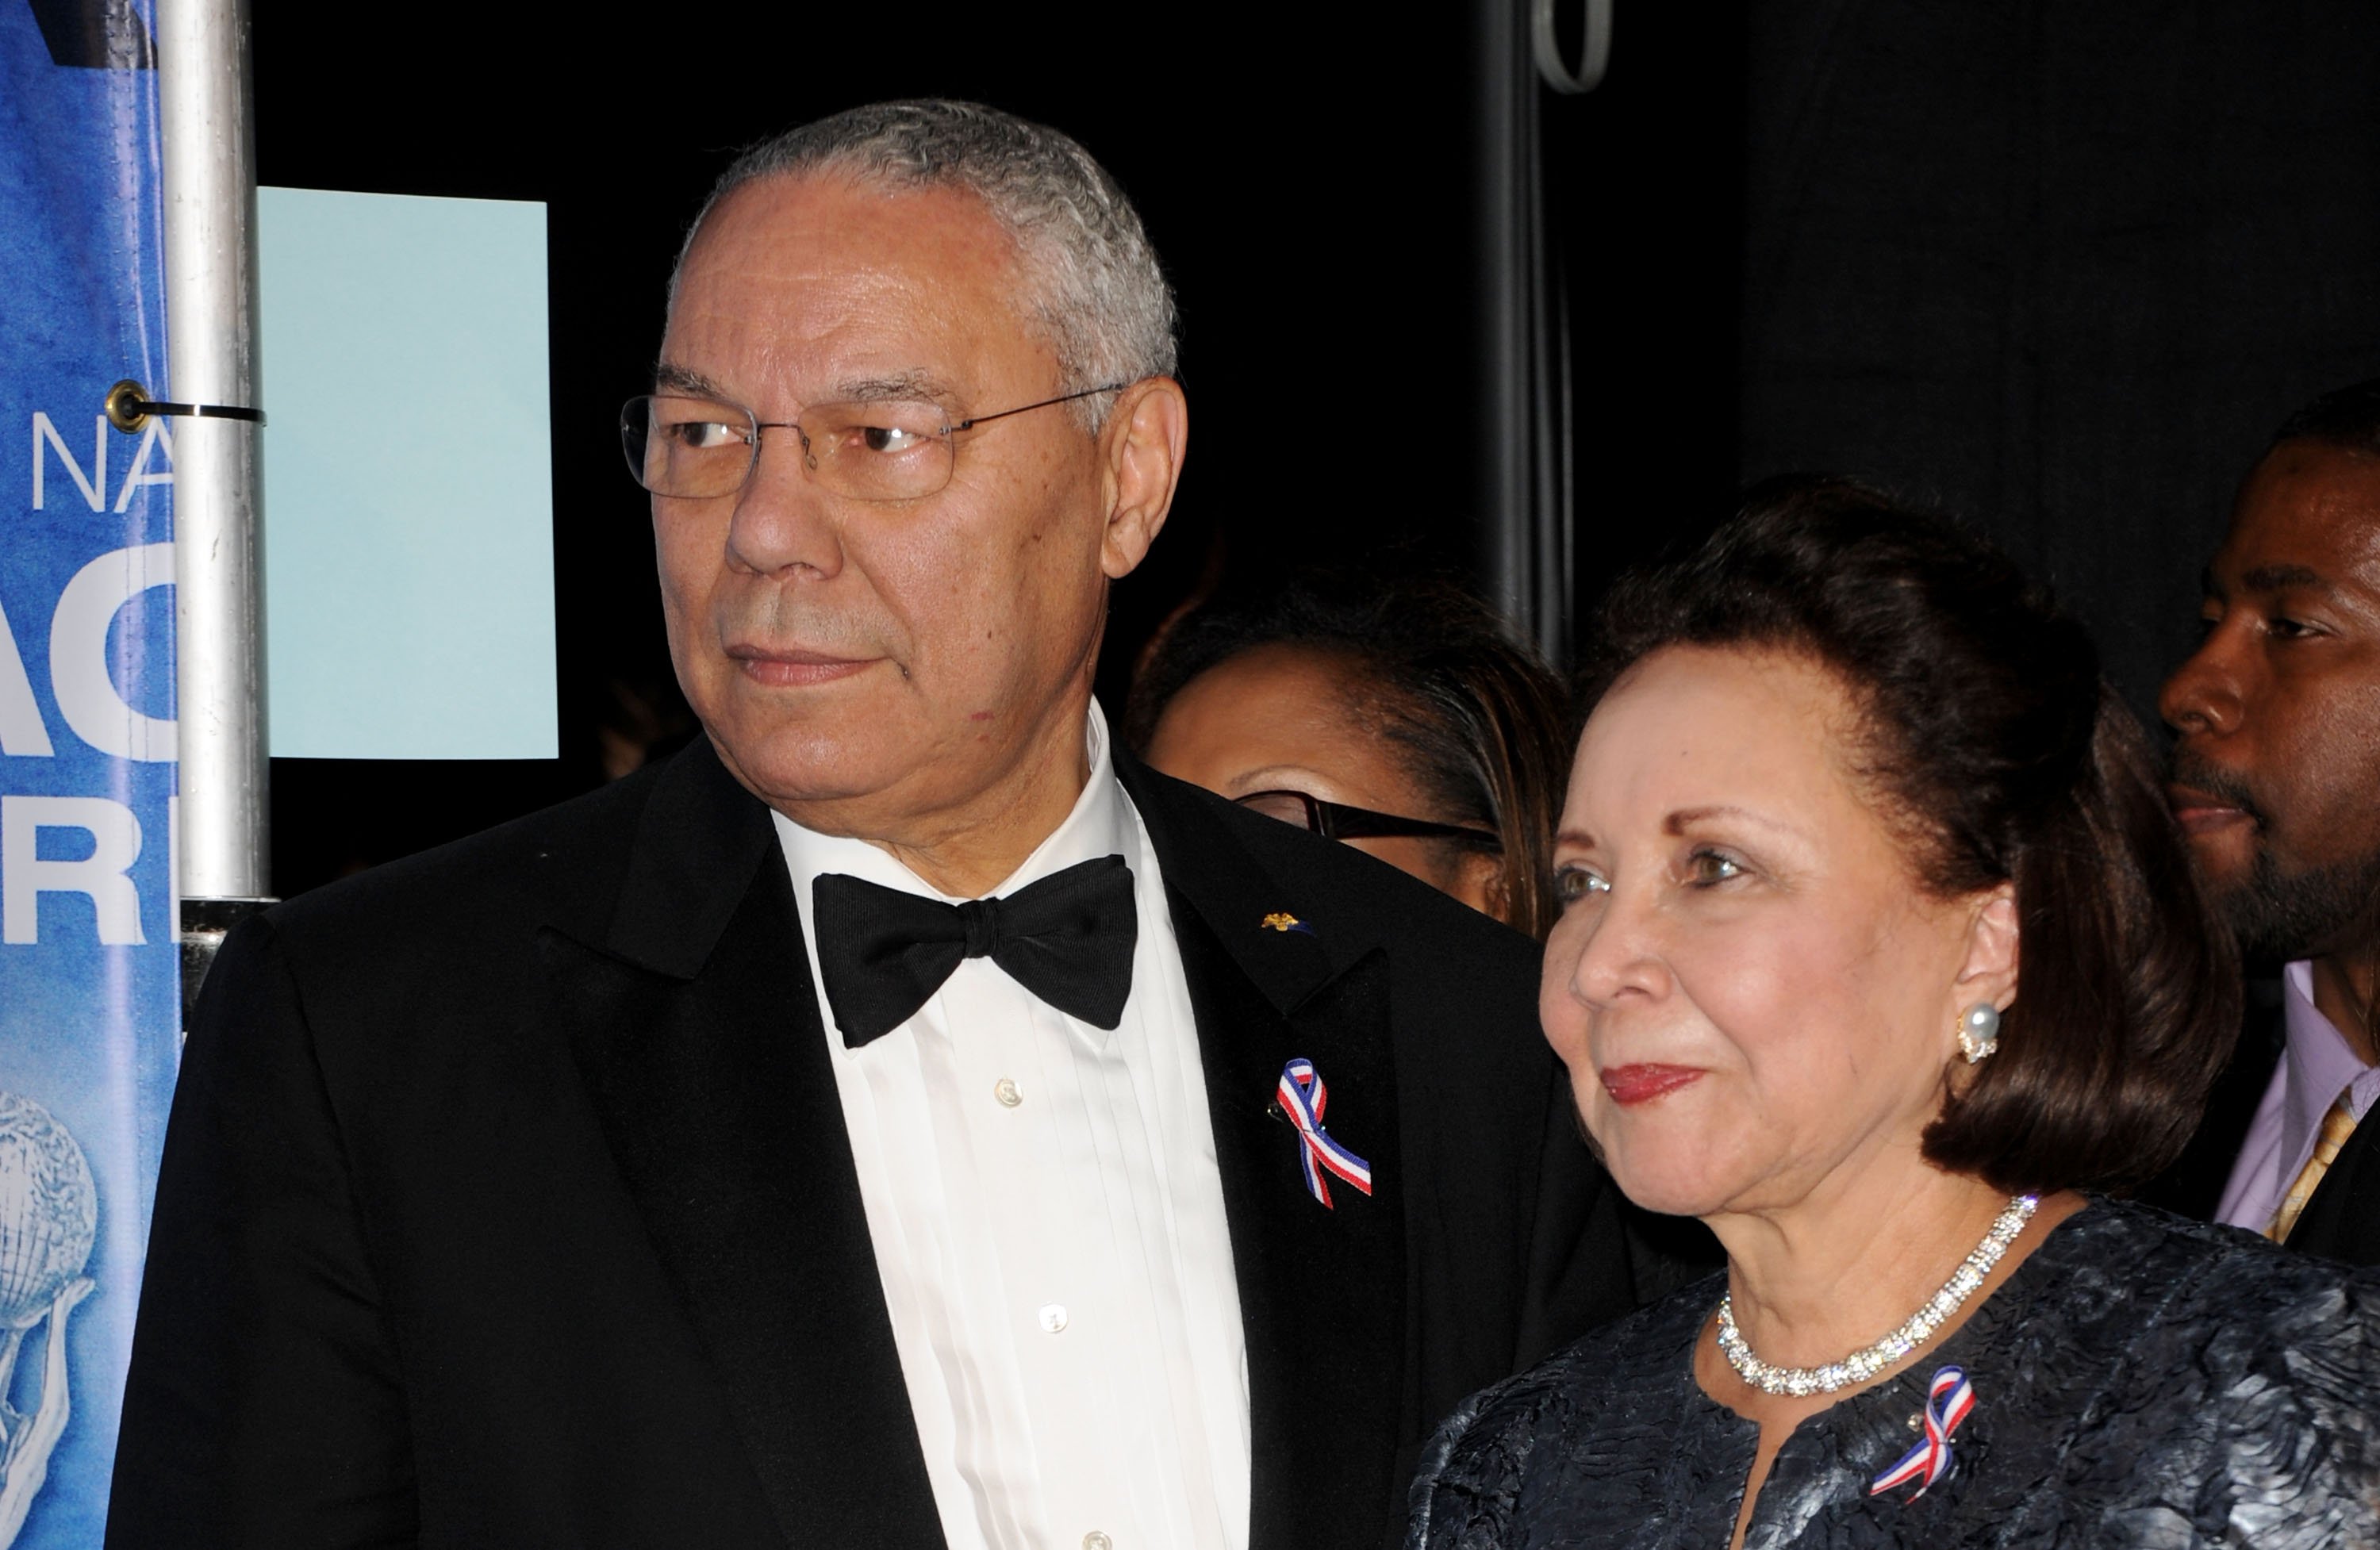 Former U.S. Secretary of State Colin Powell poses with his wife, Alma Powell